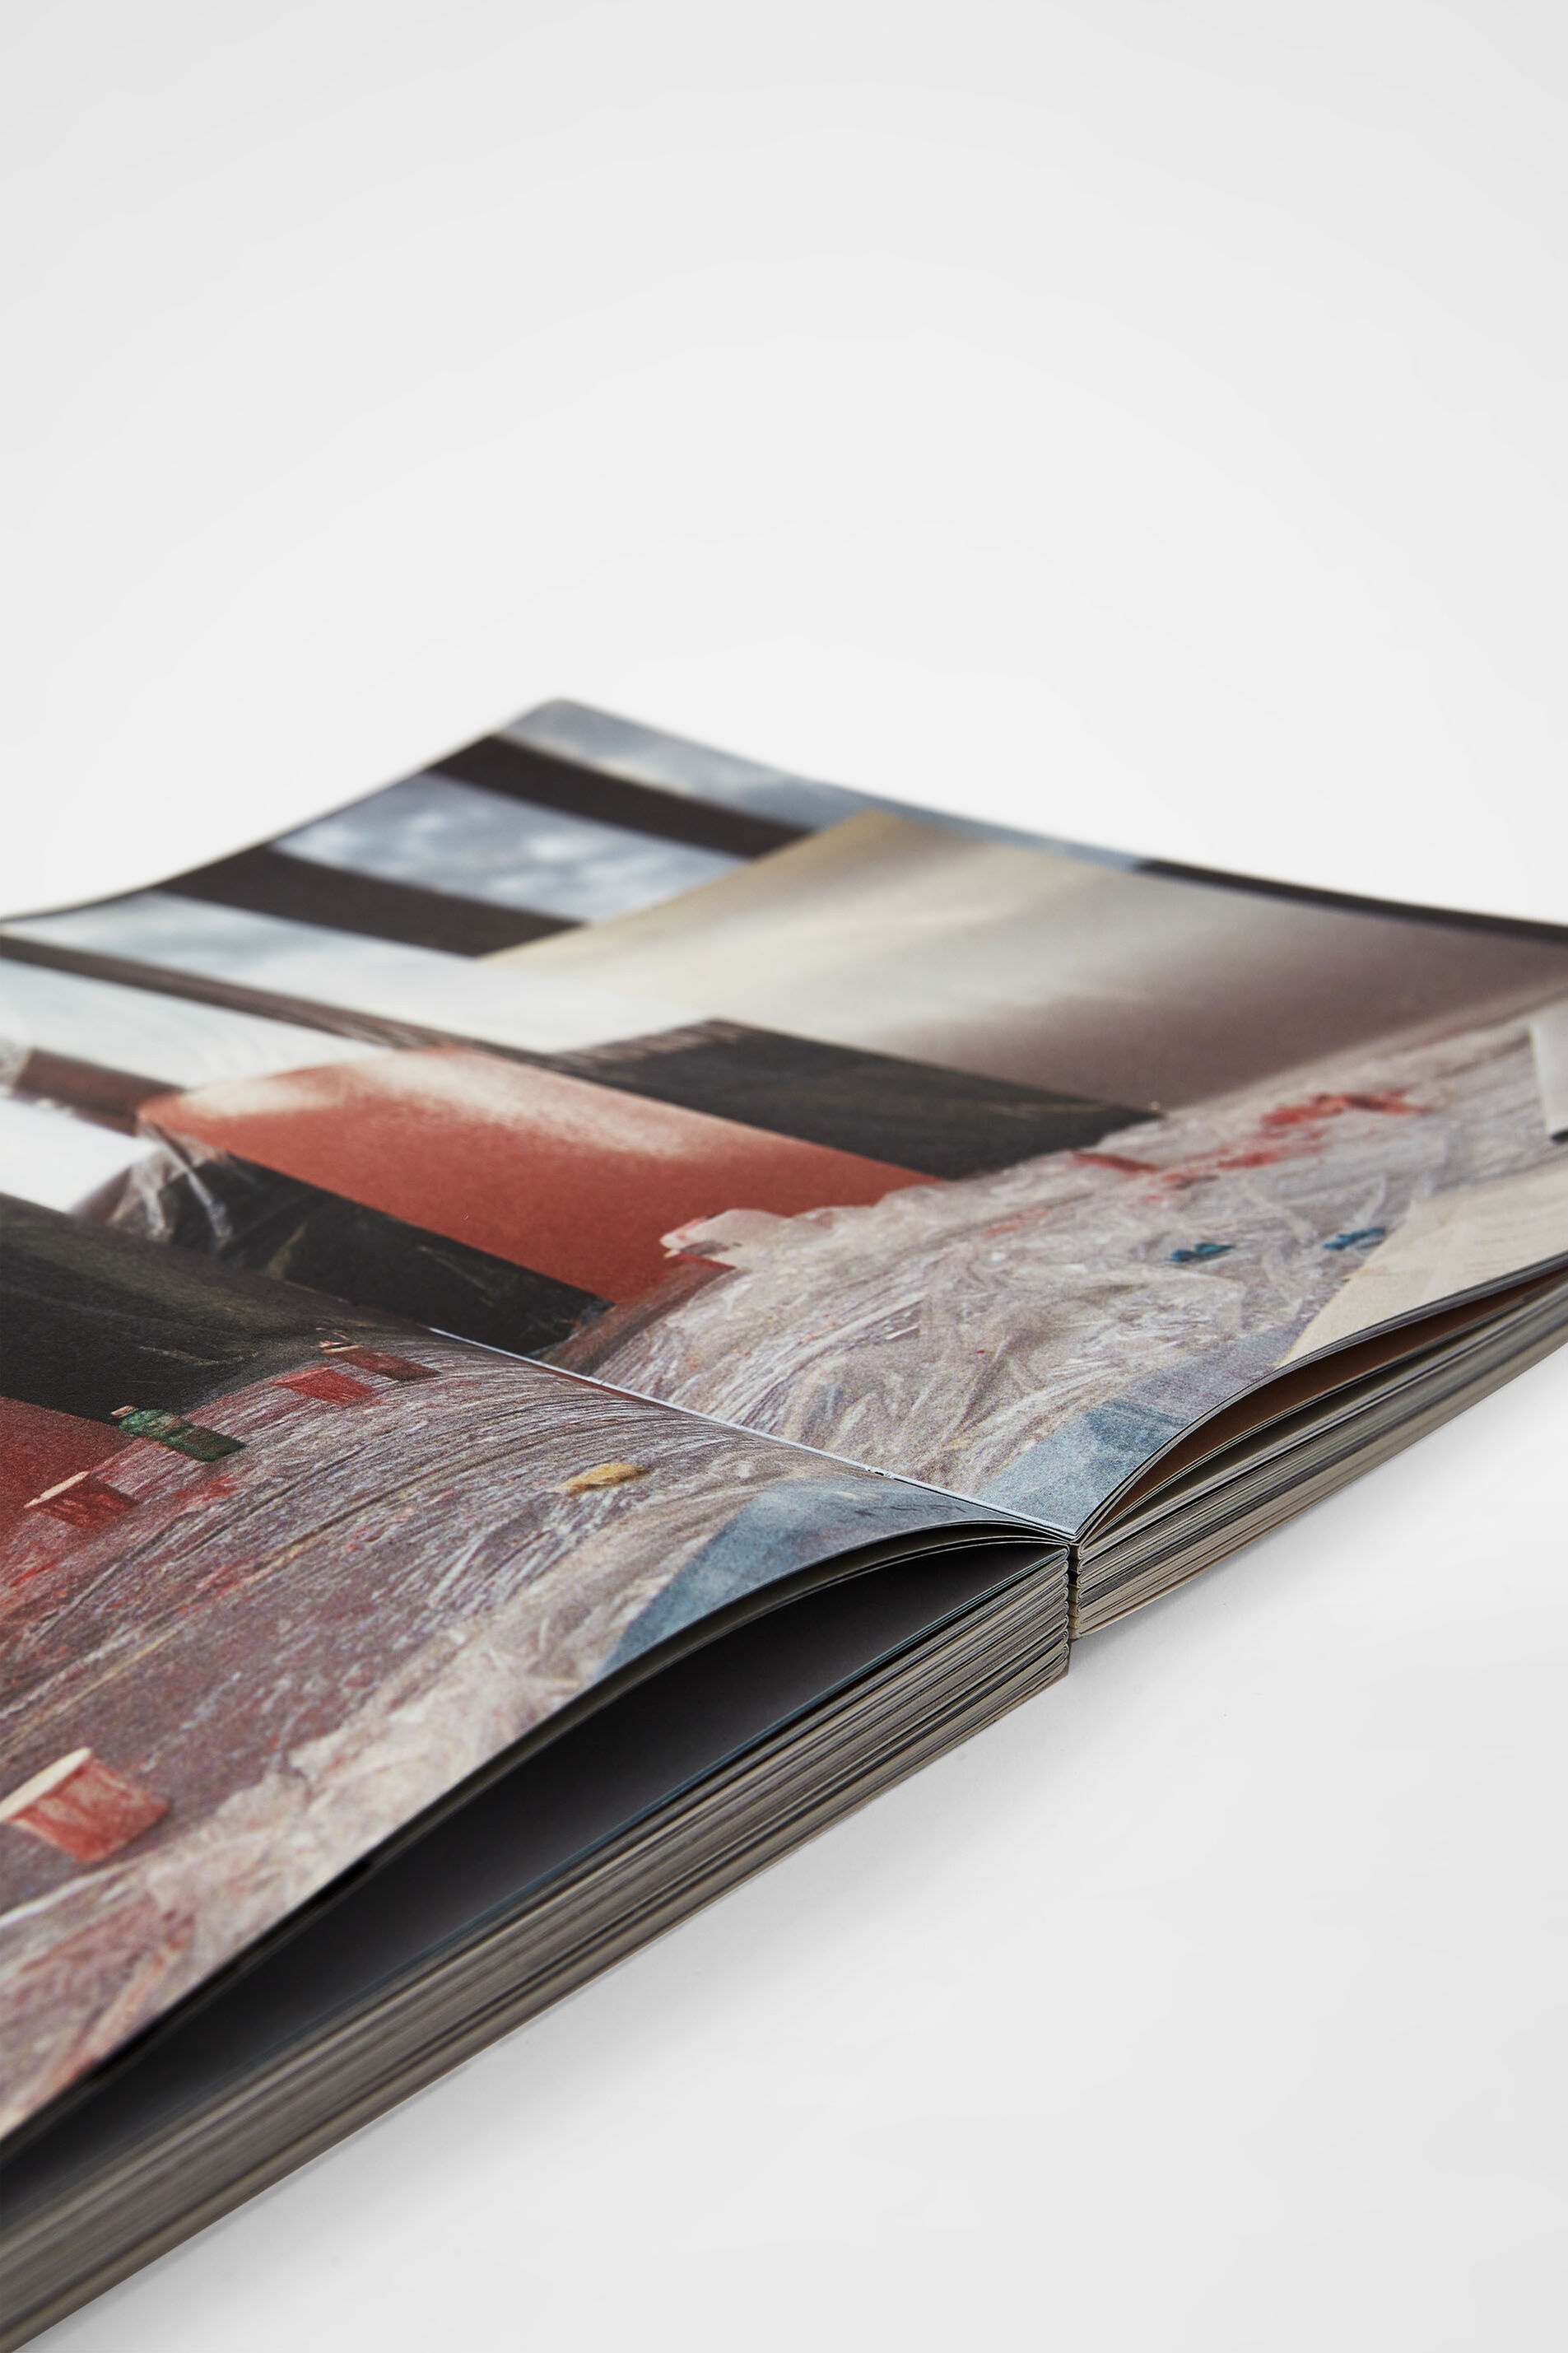 A MAGAZINE curated by Lucie and Luke Meier - 6